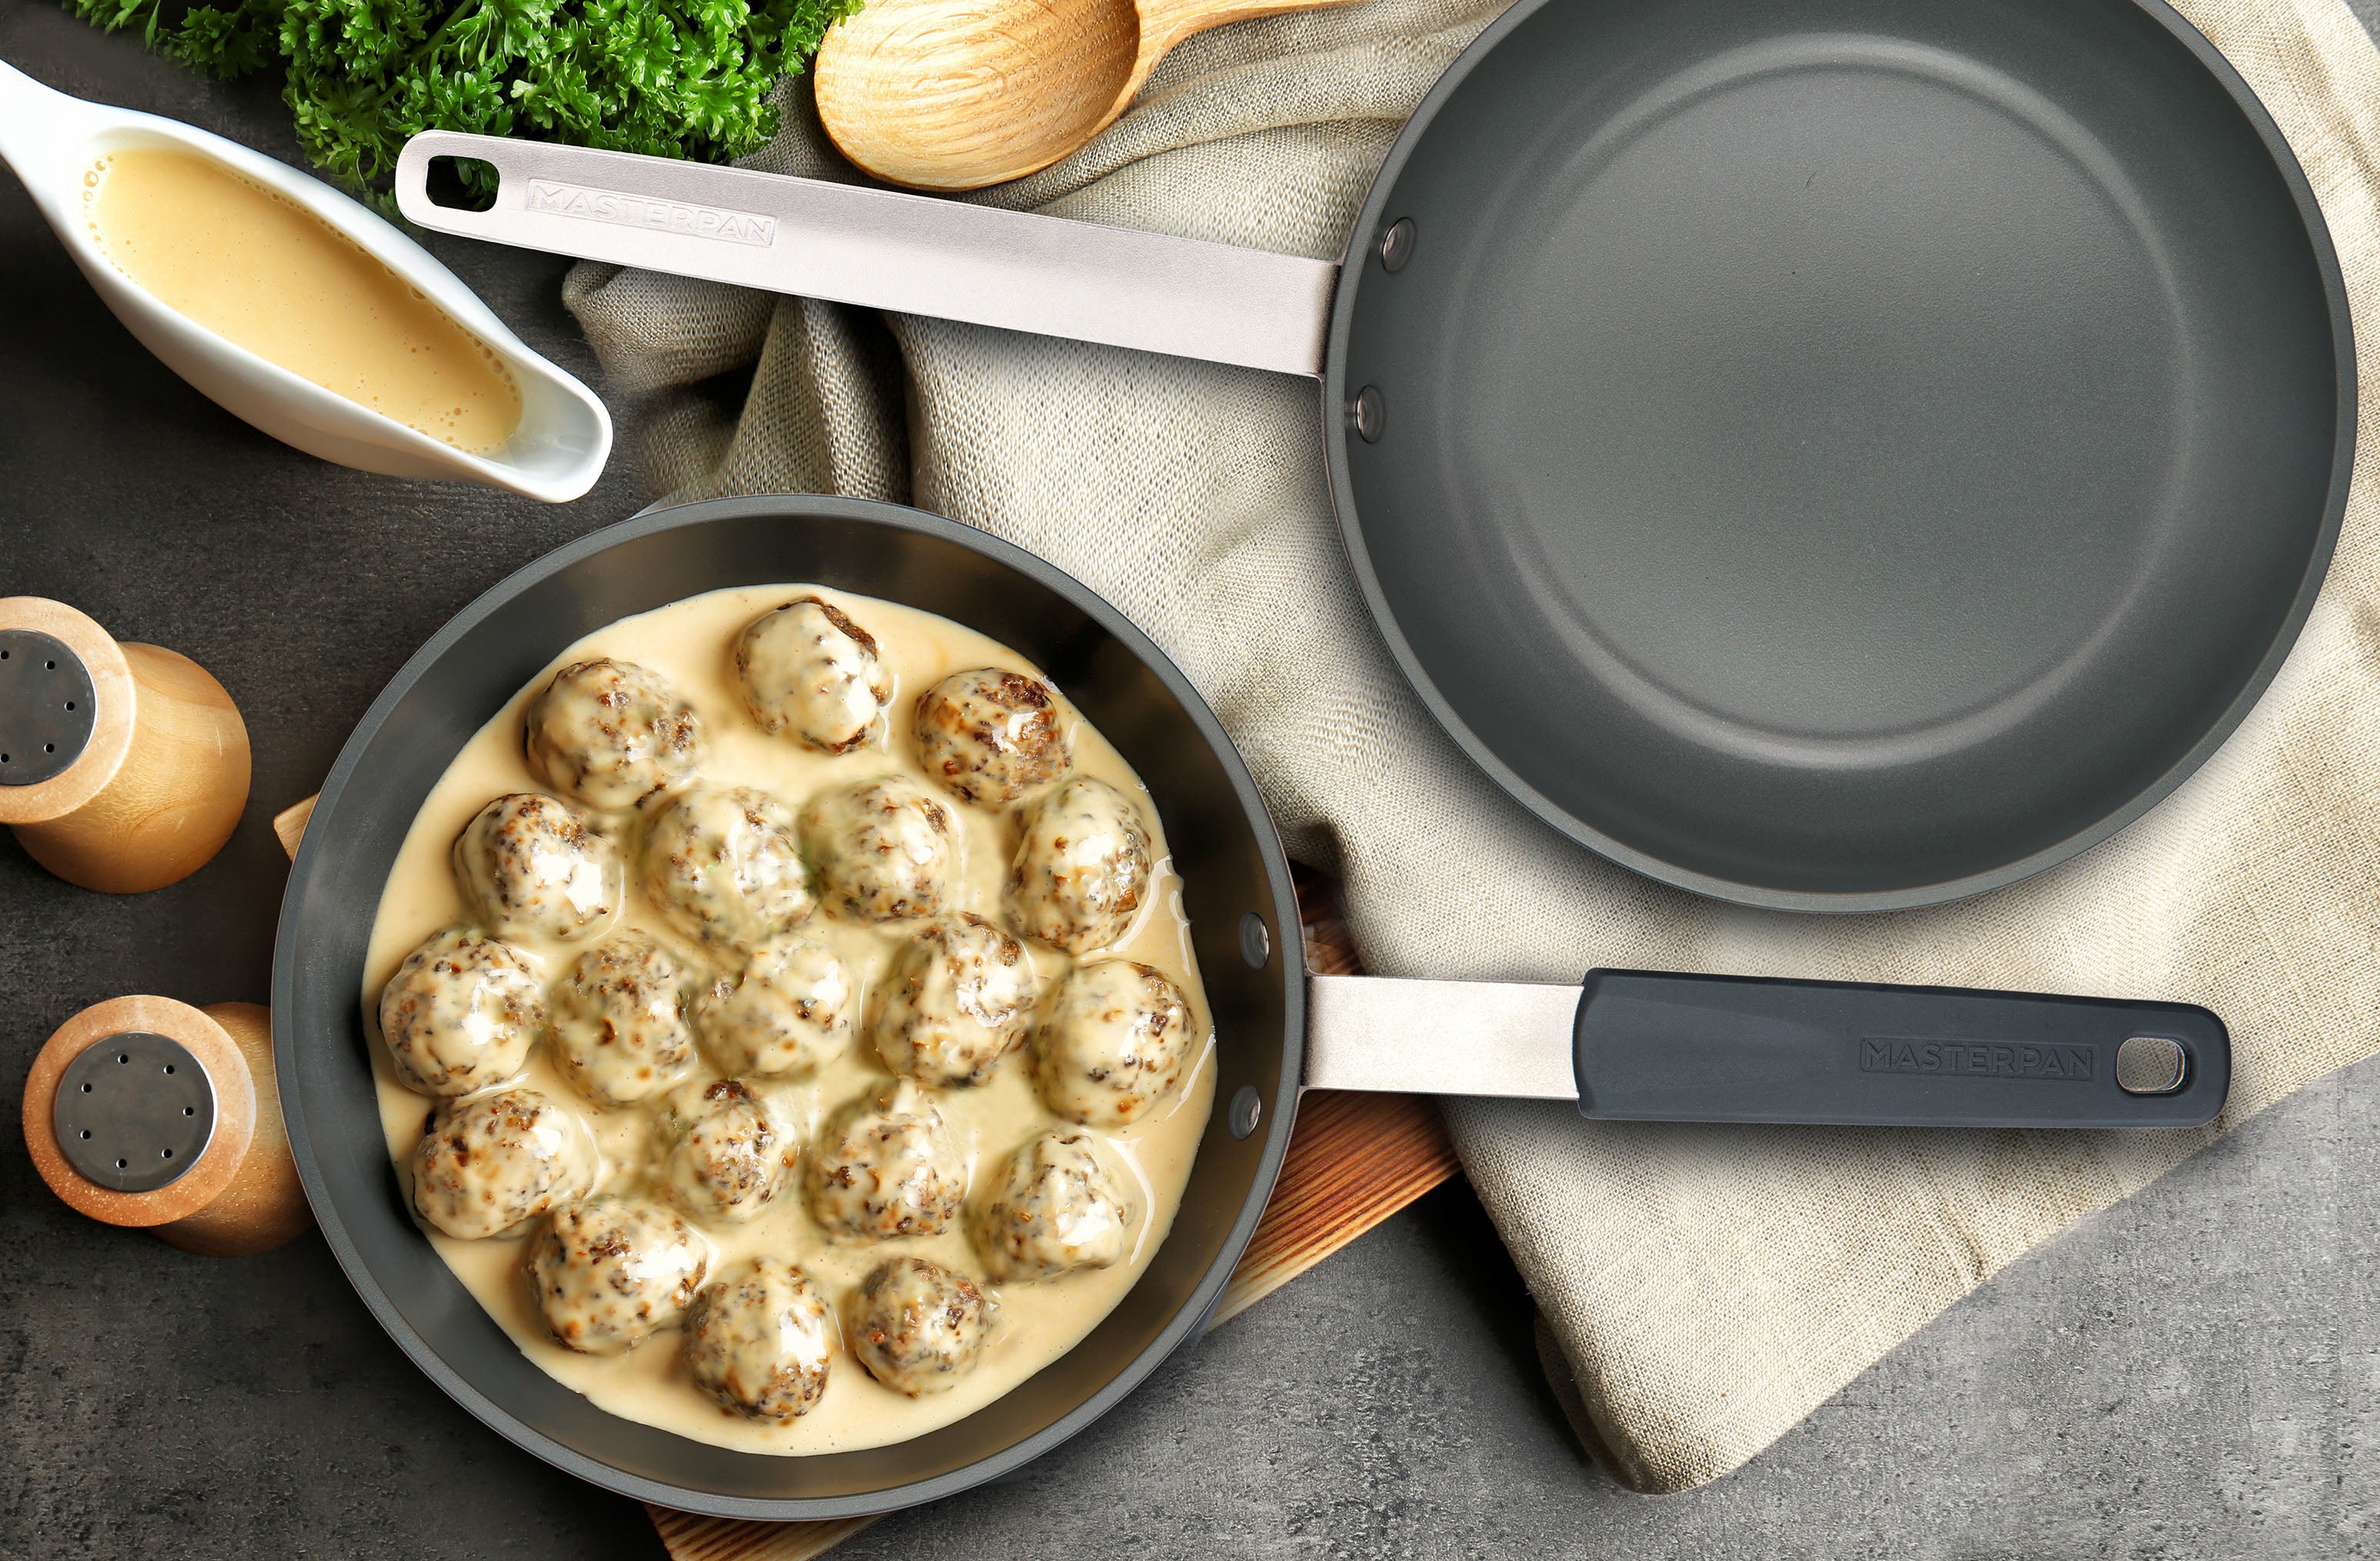 MasterPan - 5-in-1 Multi-Sectioned Nonstick Skillet